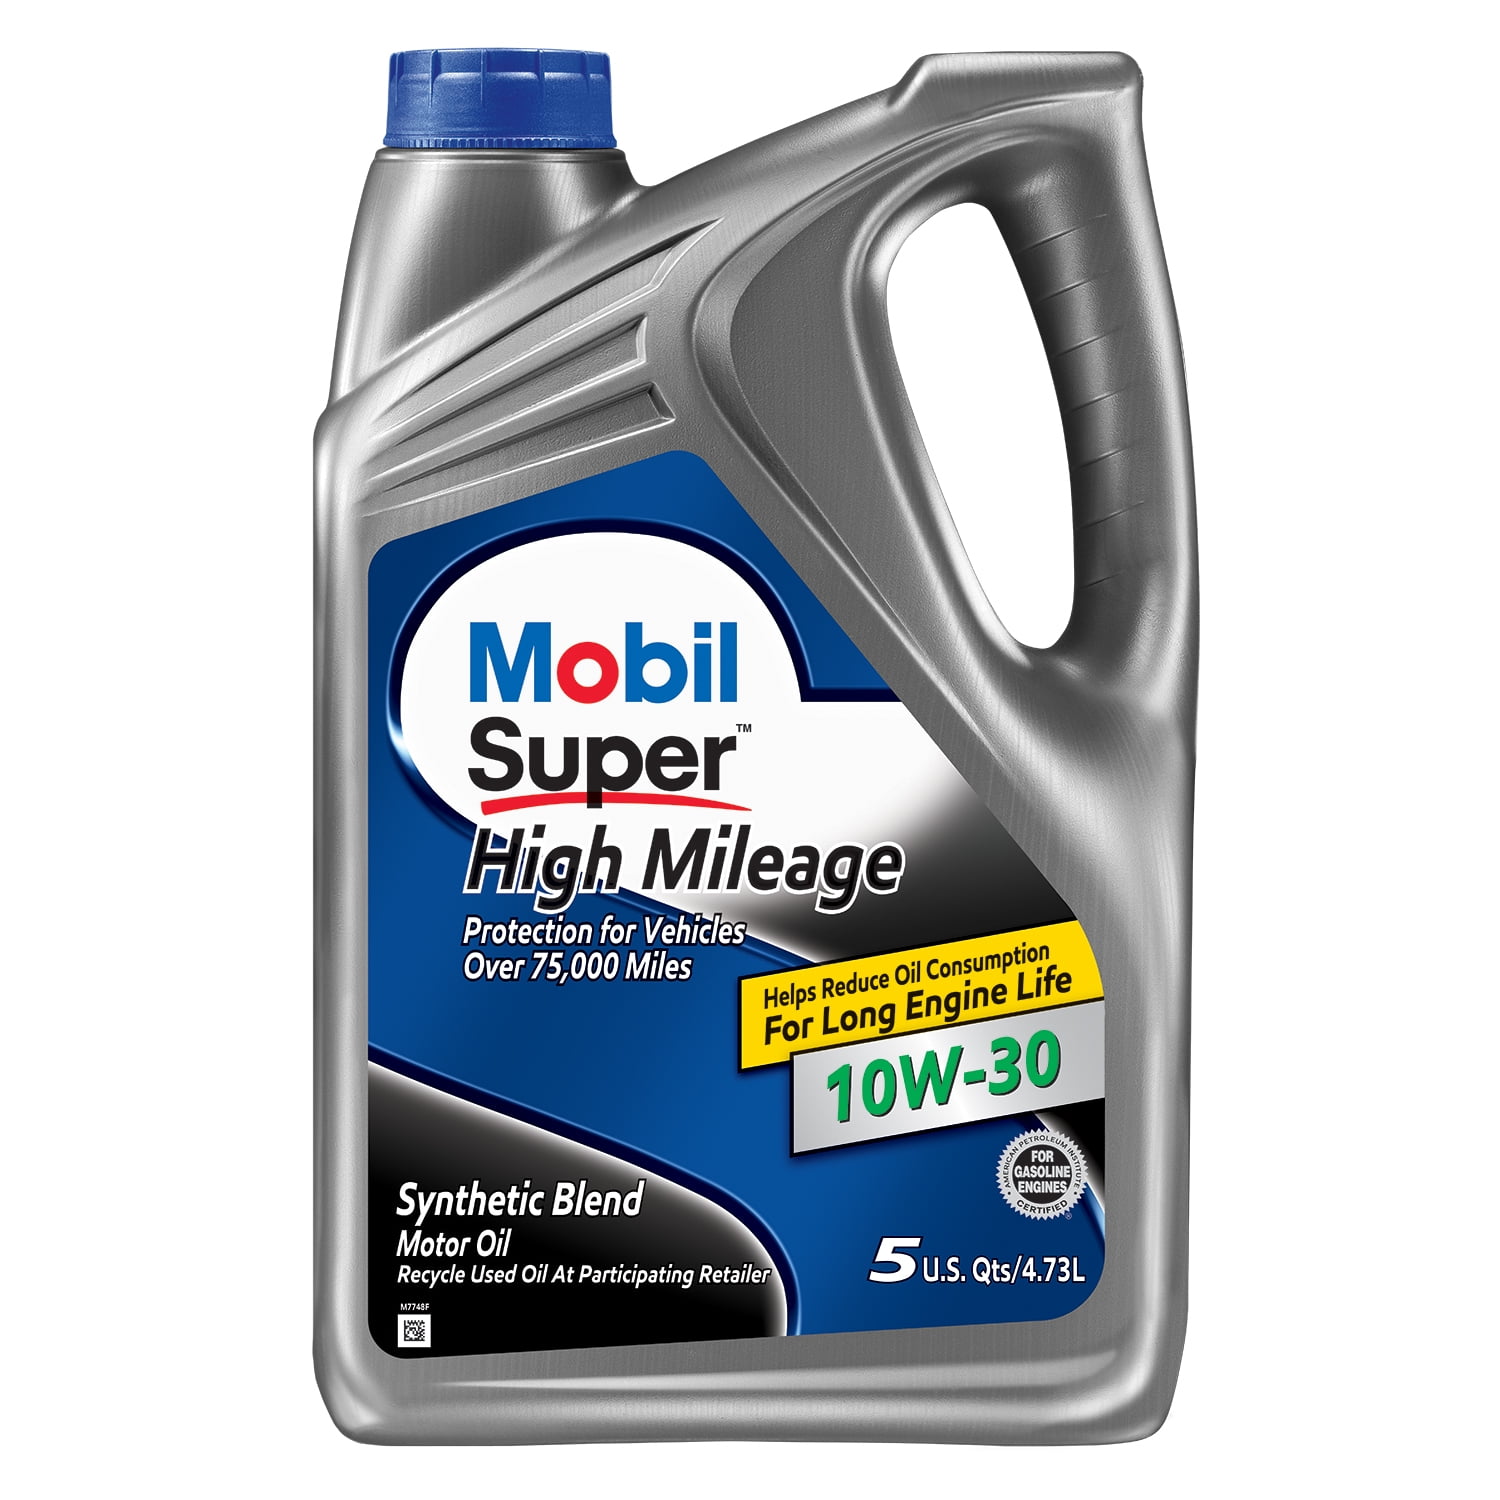 mobil-super-high-mileage-synthetic-blend-motor-oil-10w-30-5-qt